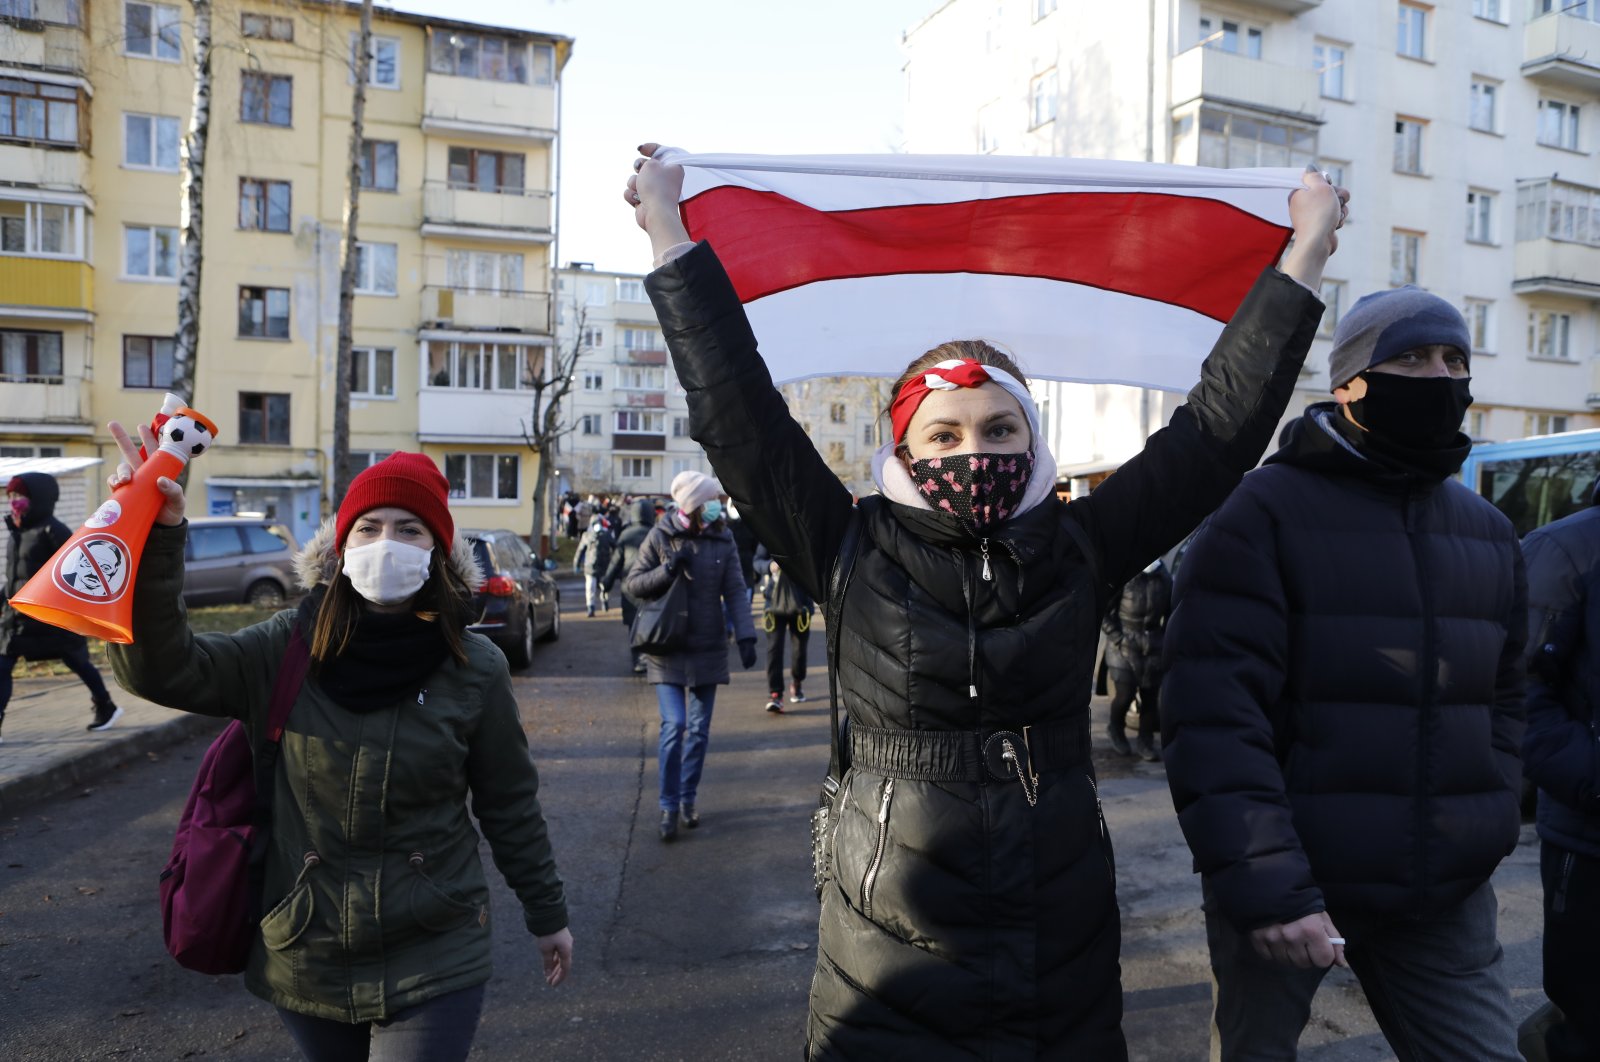 Demonstrators wearing face masks to help curb the spread of the coronavirus, at right one waves an old Belarusian national flag, during an opposition rally to protest the official presidential election results in Minsk, Belarus, Sunday, Dec. 6, 2020. (AP photo)